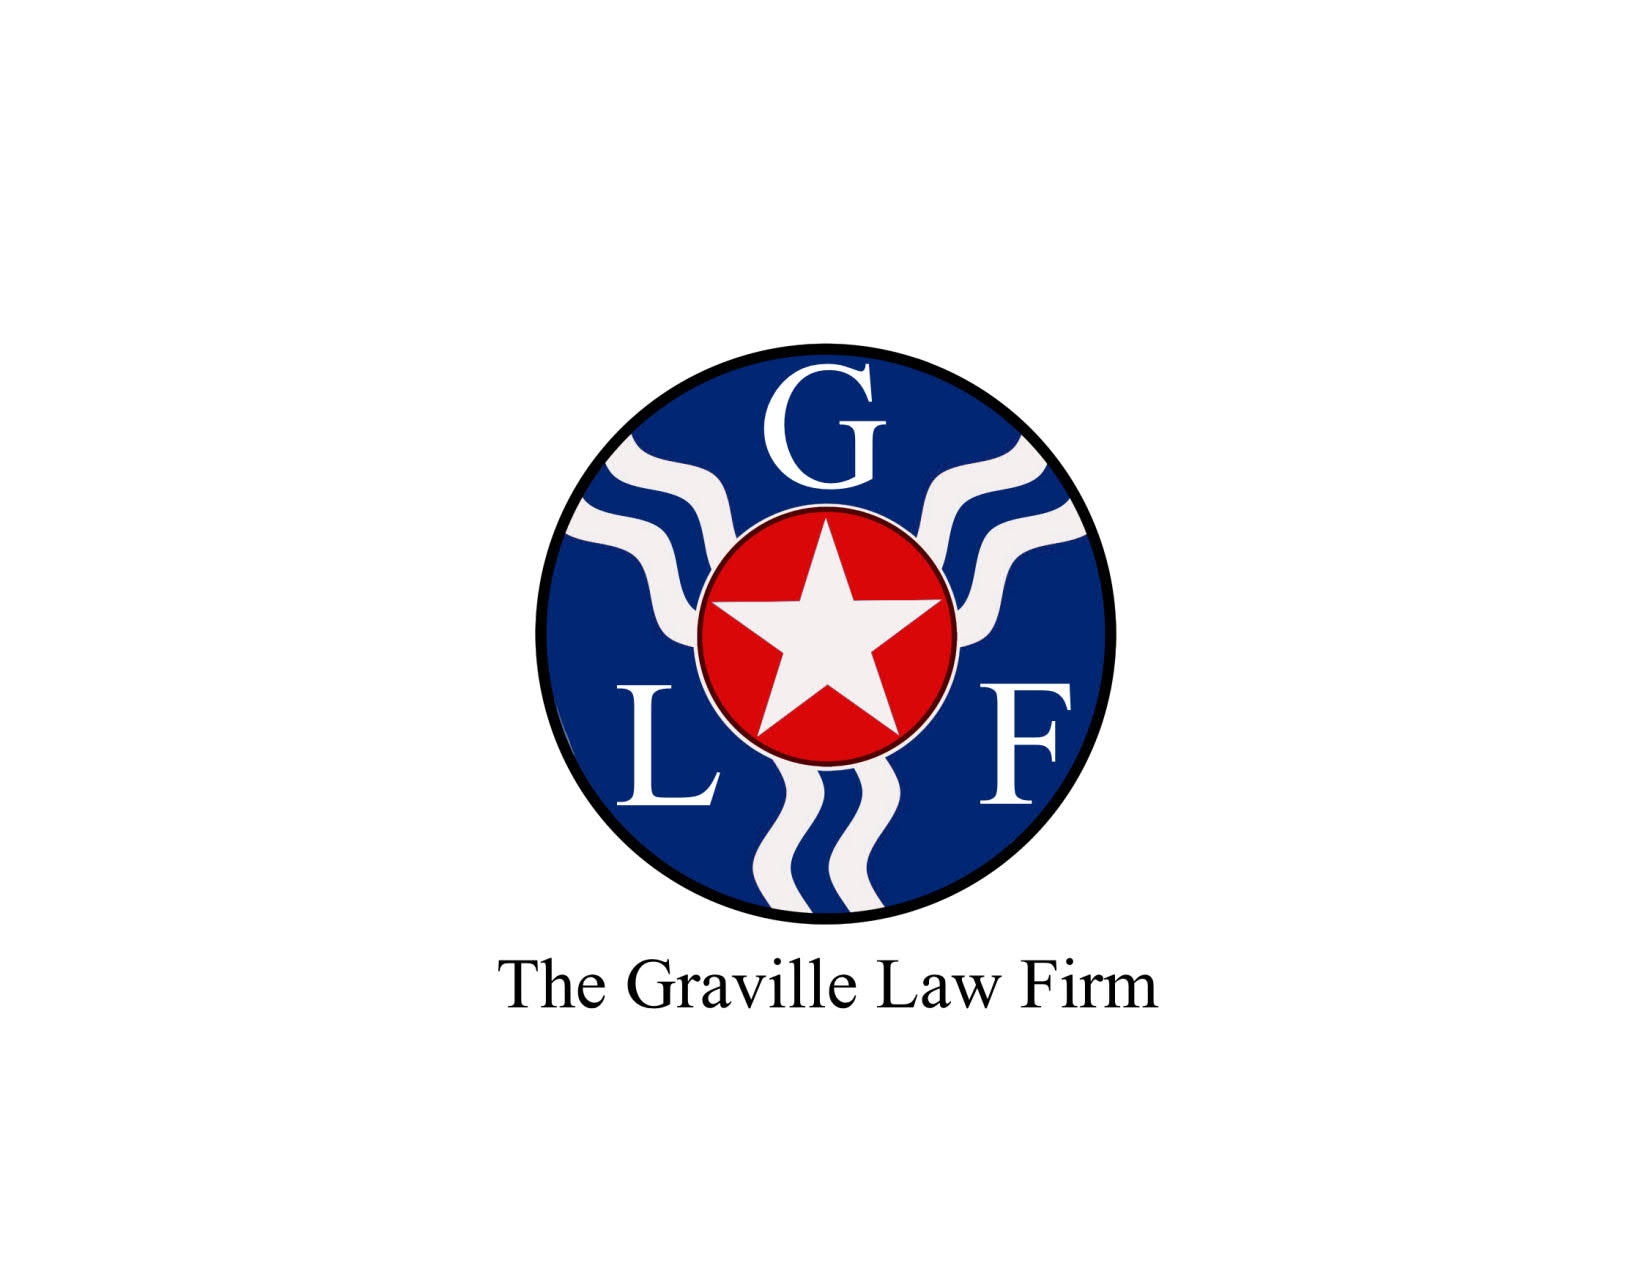 Graville Law Firm